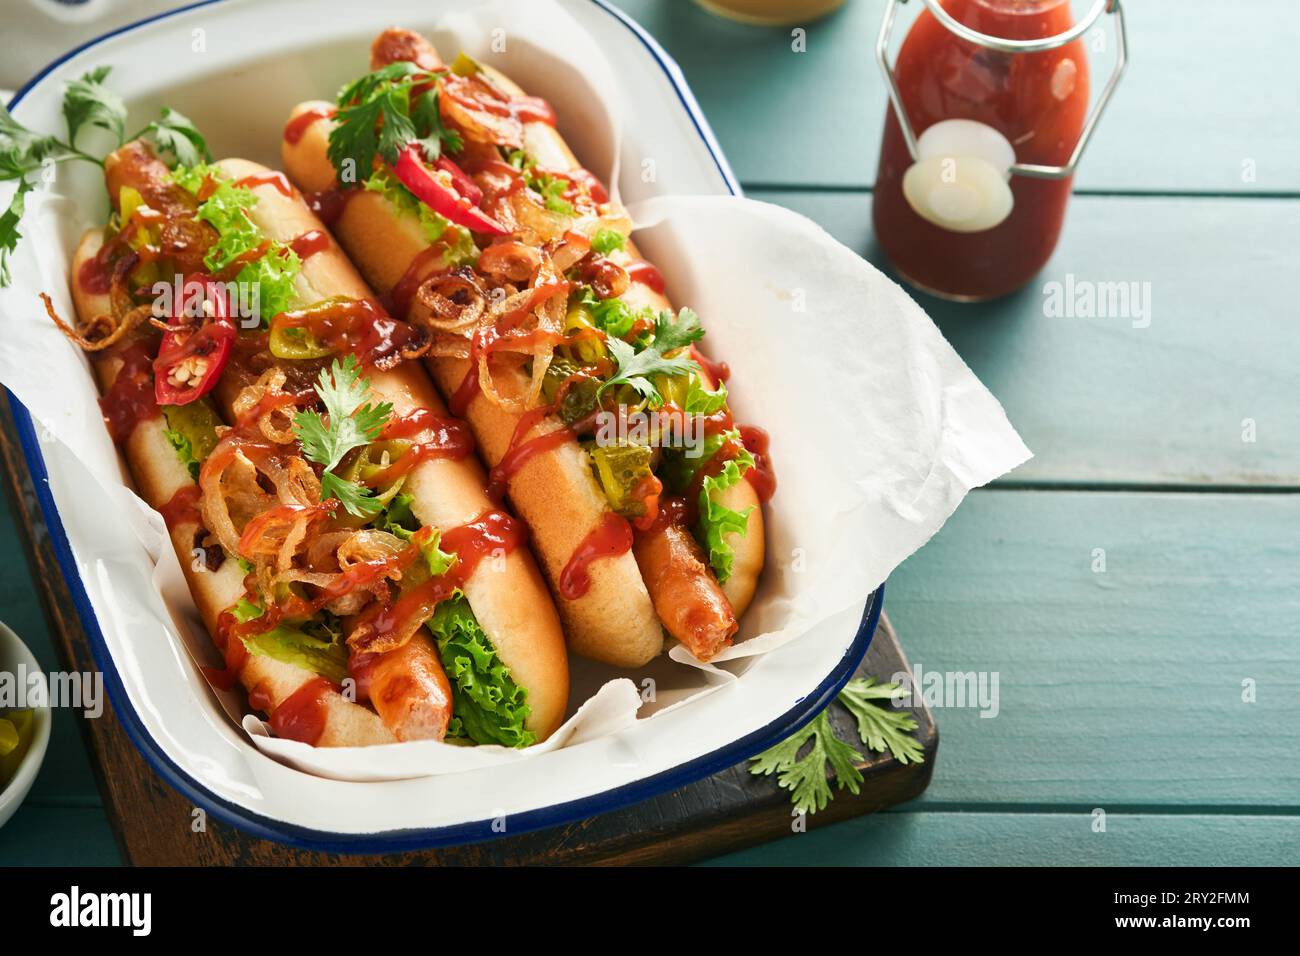 Delicious grilled hotdog with pickled cucumbers, chili peppers, caramelized onions, ketchup, mustard in craft paper on blue old wooden background. Hom Stock Photo